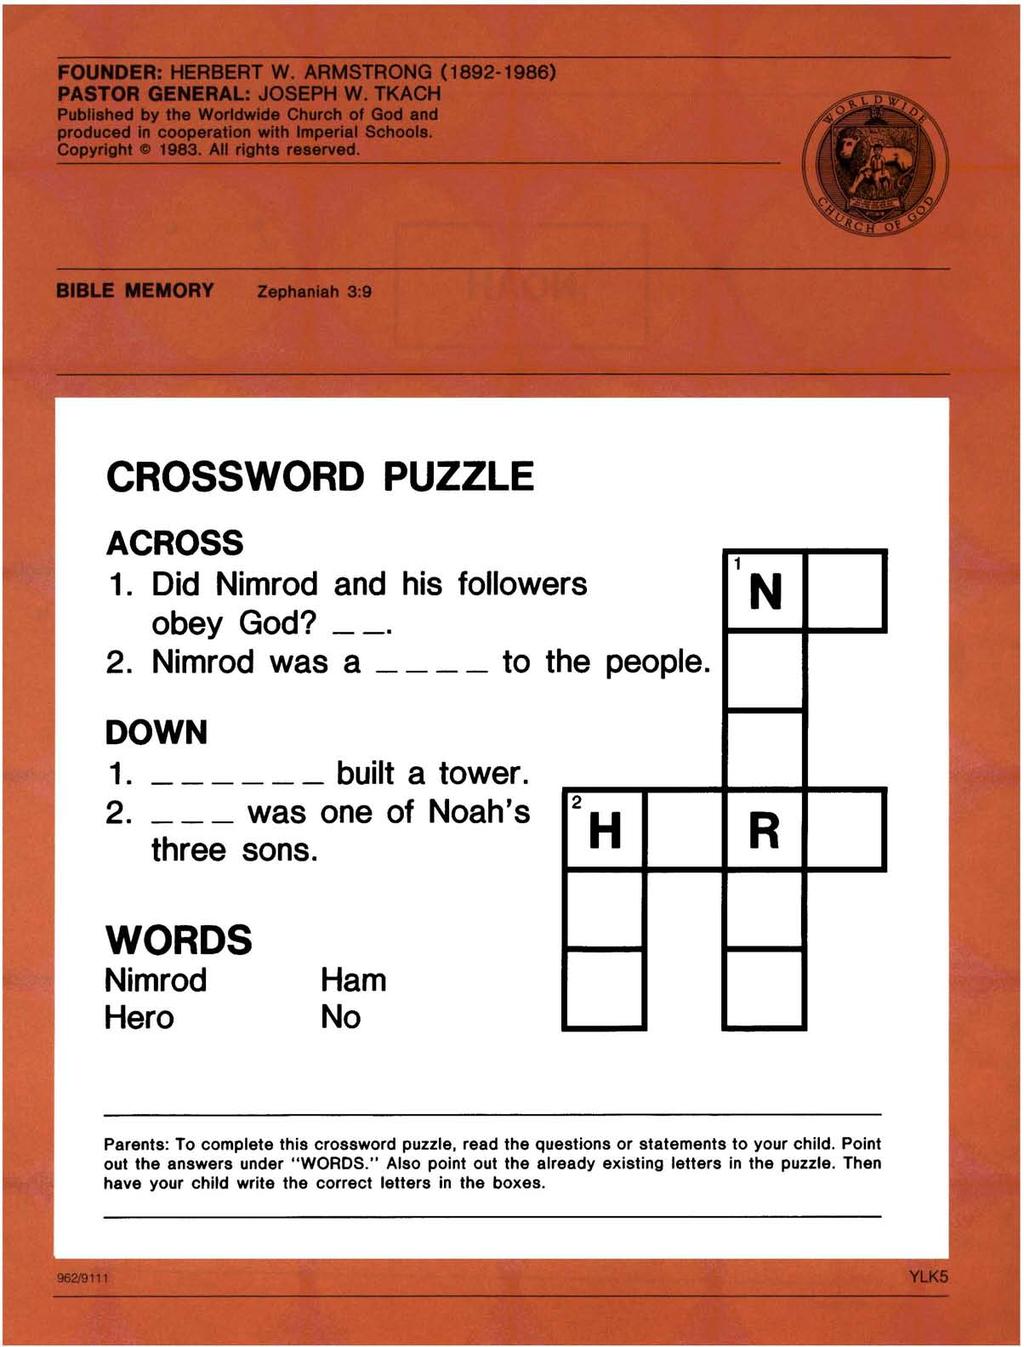 CROSSWORD PUZZLE ACROSS 1. Did Nimrod and his followers obey God?. 2. Nimrod was a to the people. 1 N DOWN 1. built a tower. 2. was one of Noah's three sons.